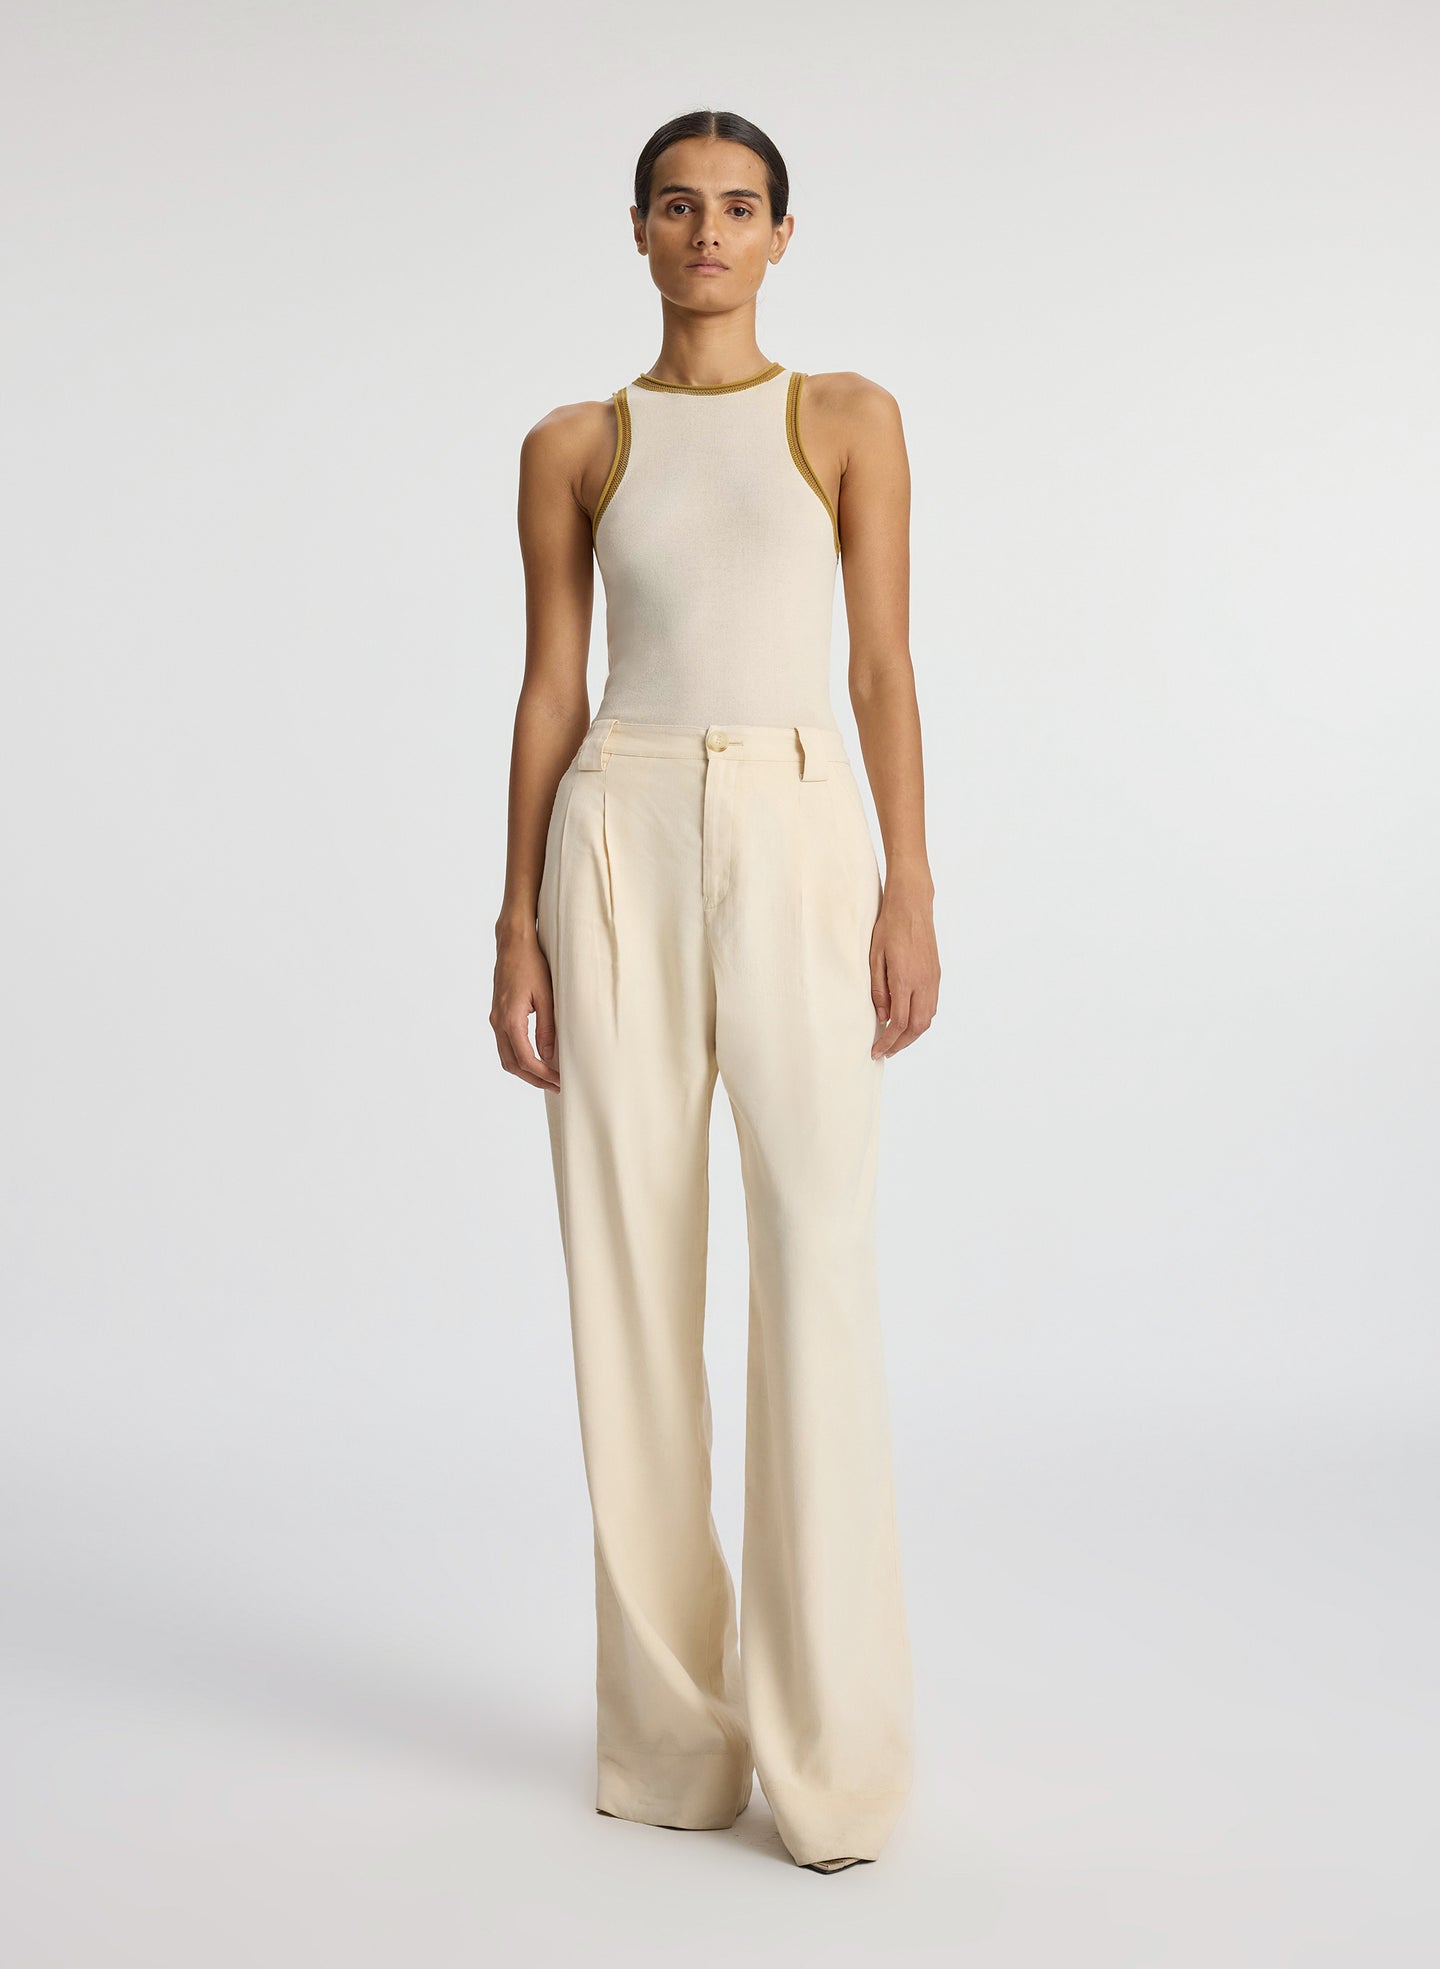 Front view of woman wearing cream tank top and beige wide leg pants